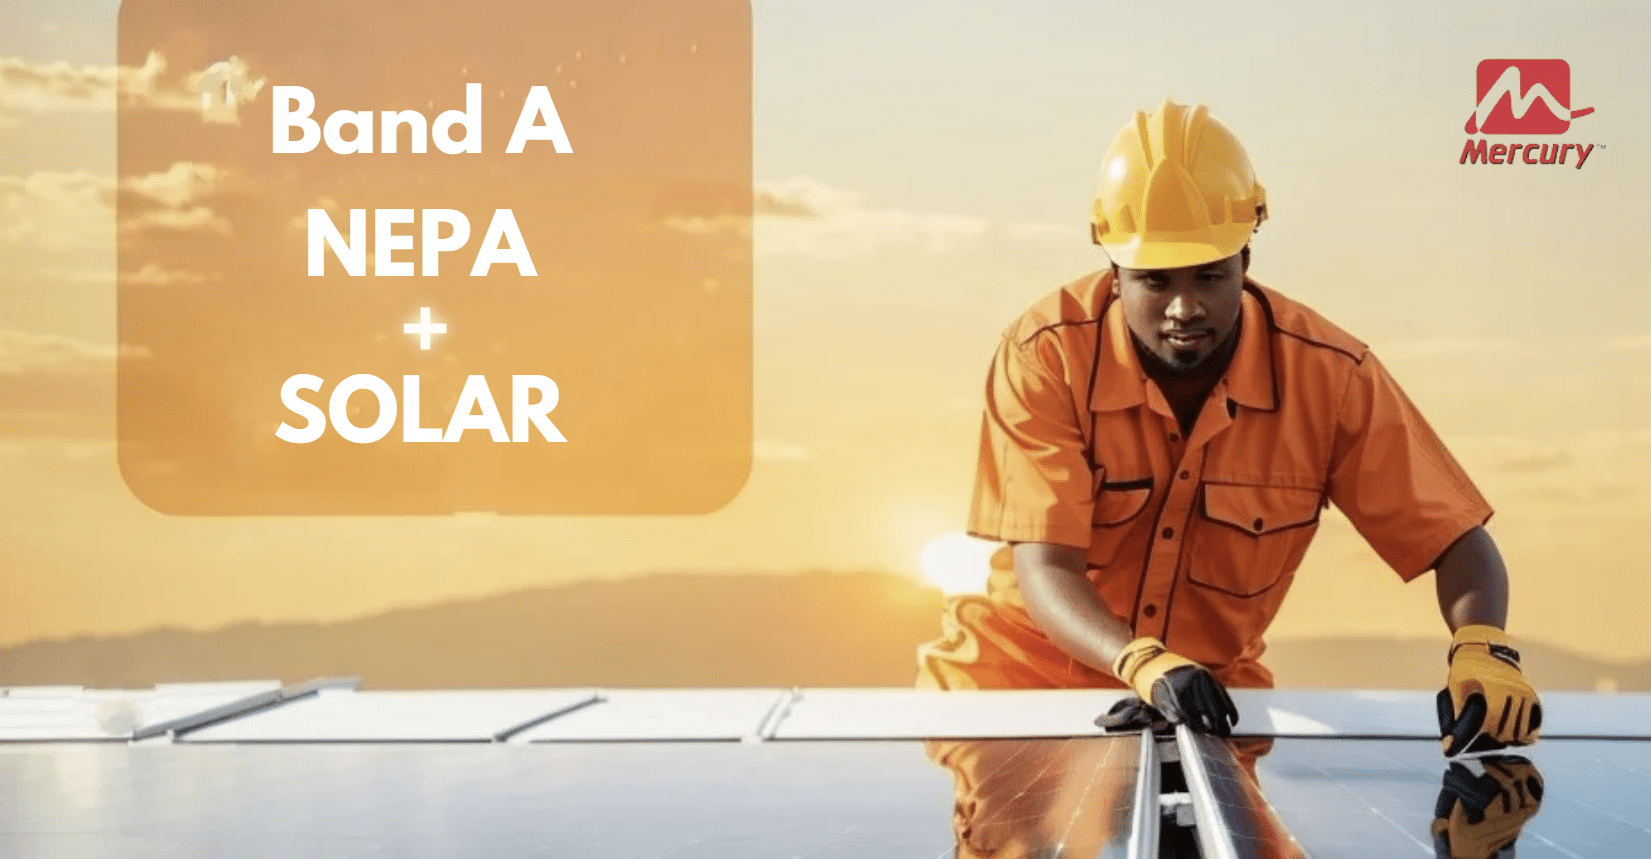 How to Enjoy NEPA Band A Electricity and Still Save Money Each Month with Solar, Inverters, and Batteries